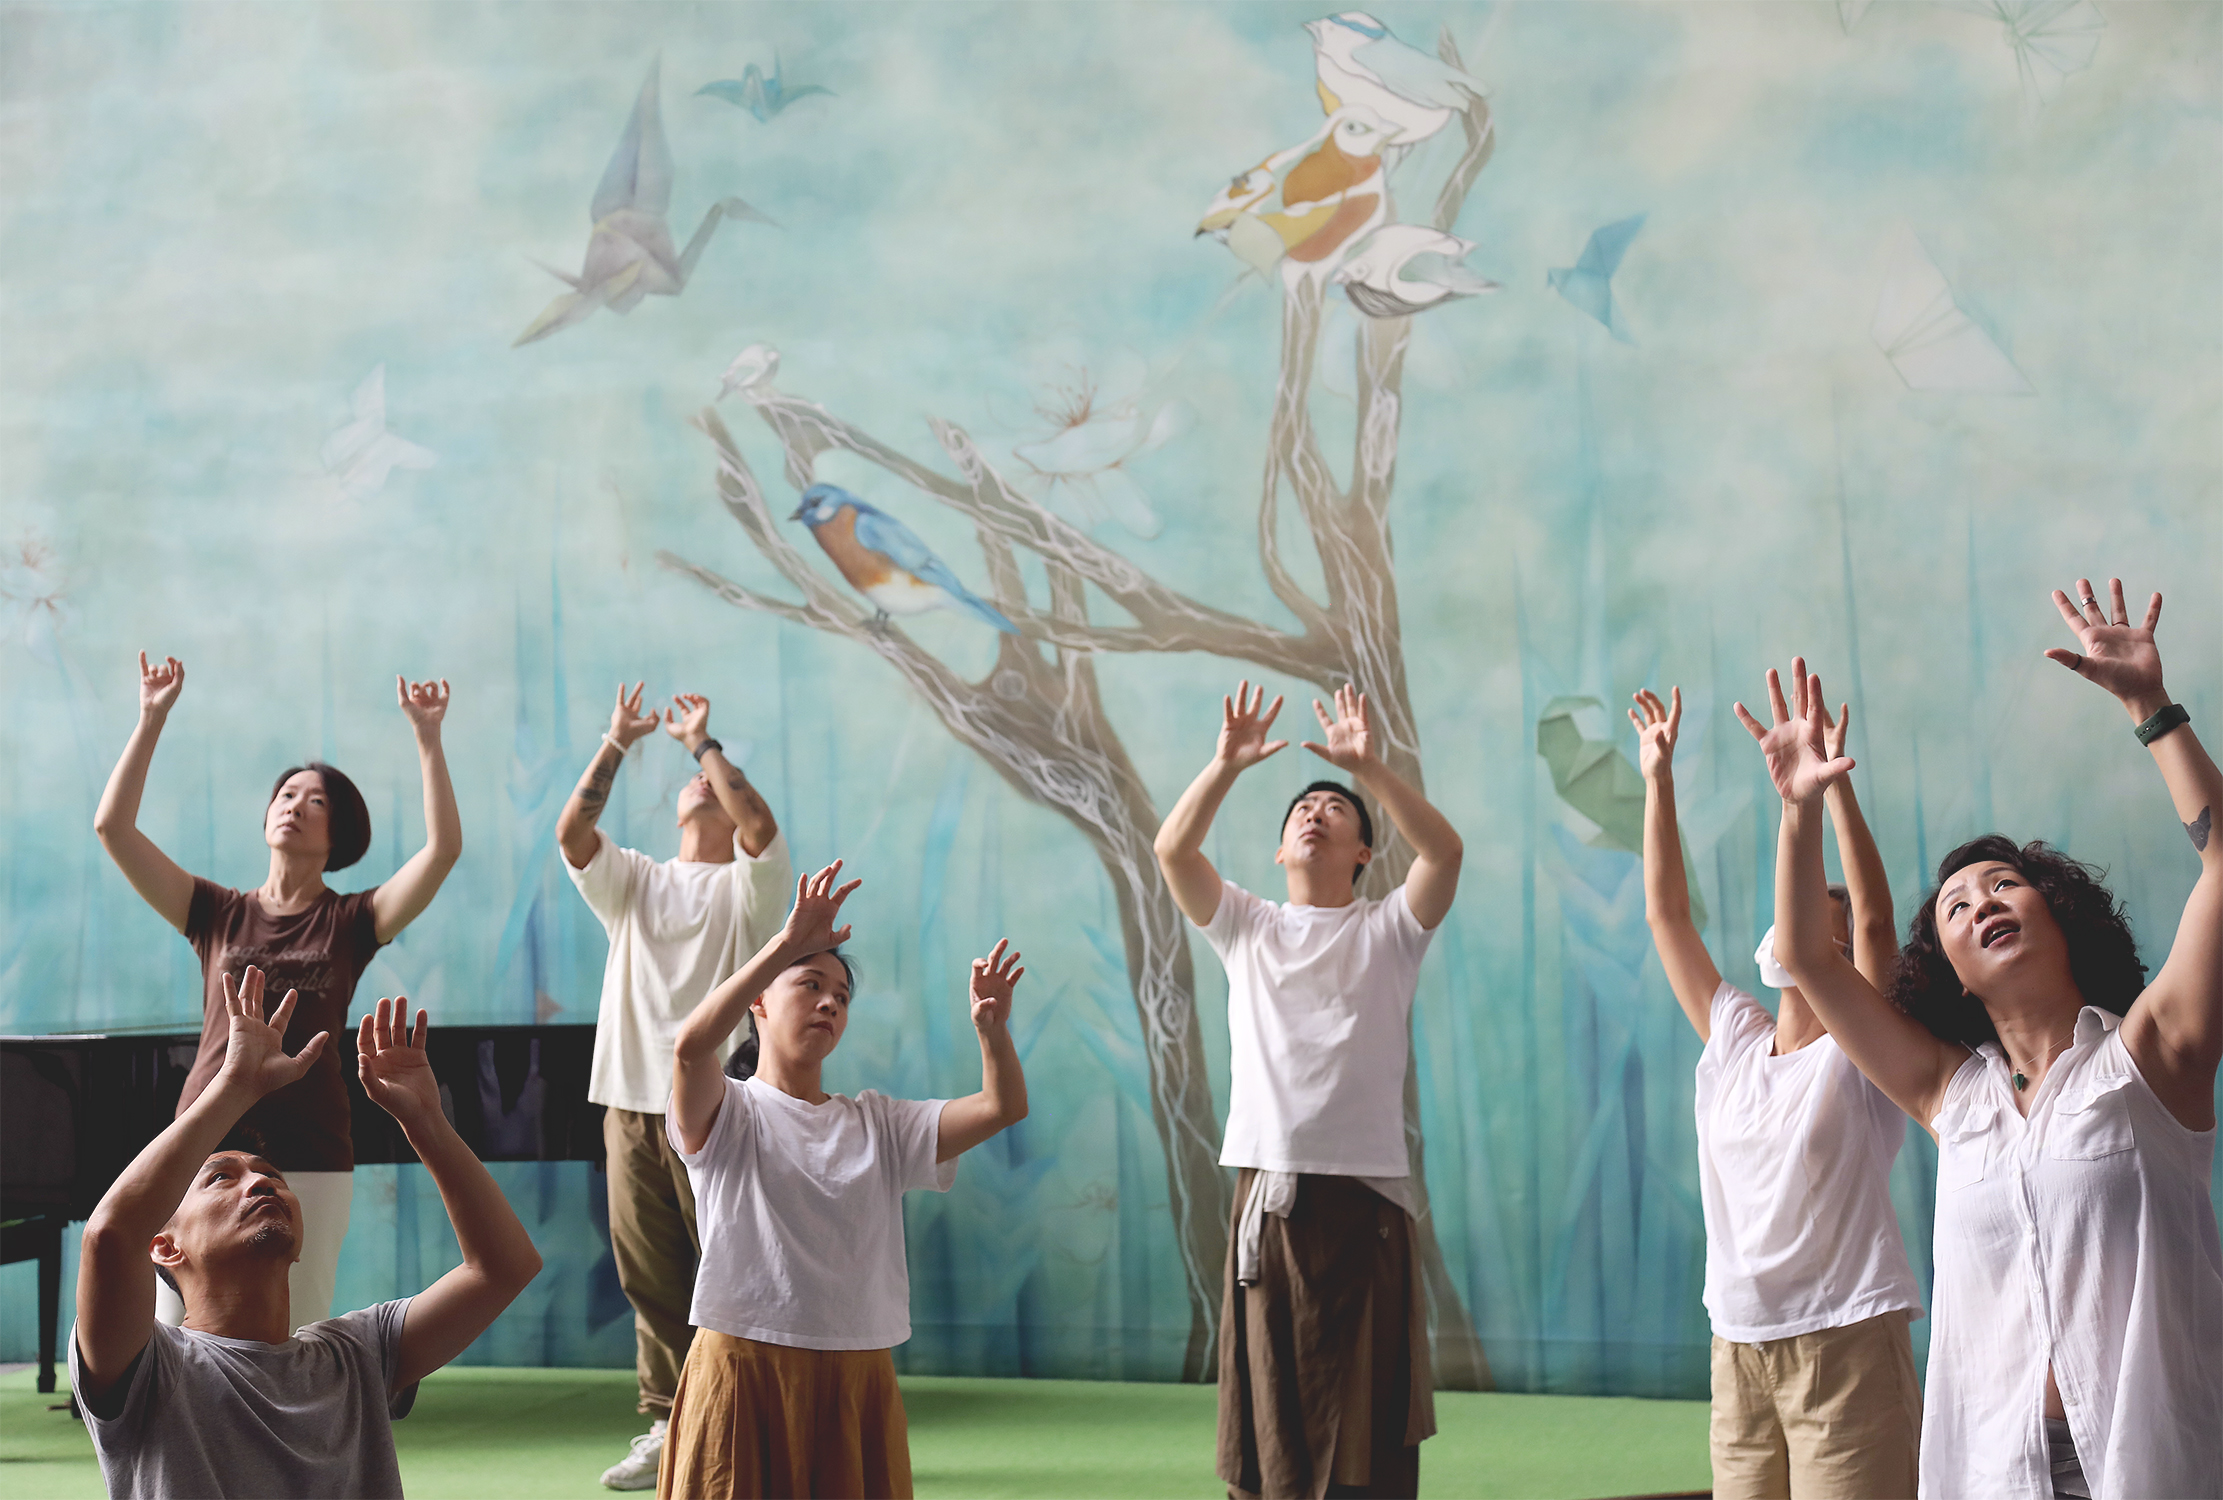 In front of a mural with light blue background with a tree trunk, a few birds and some paper cranes, seven dancers reaching their hands towards the sky, heads looking up.